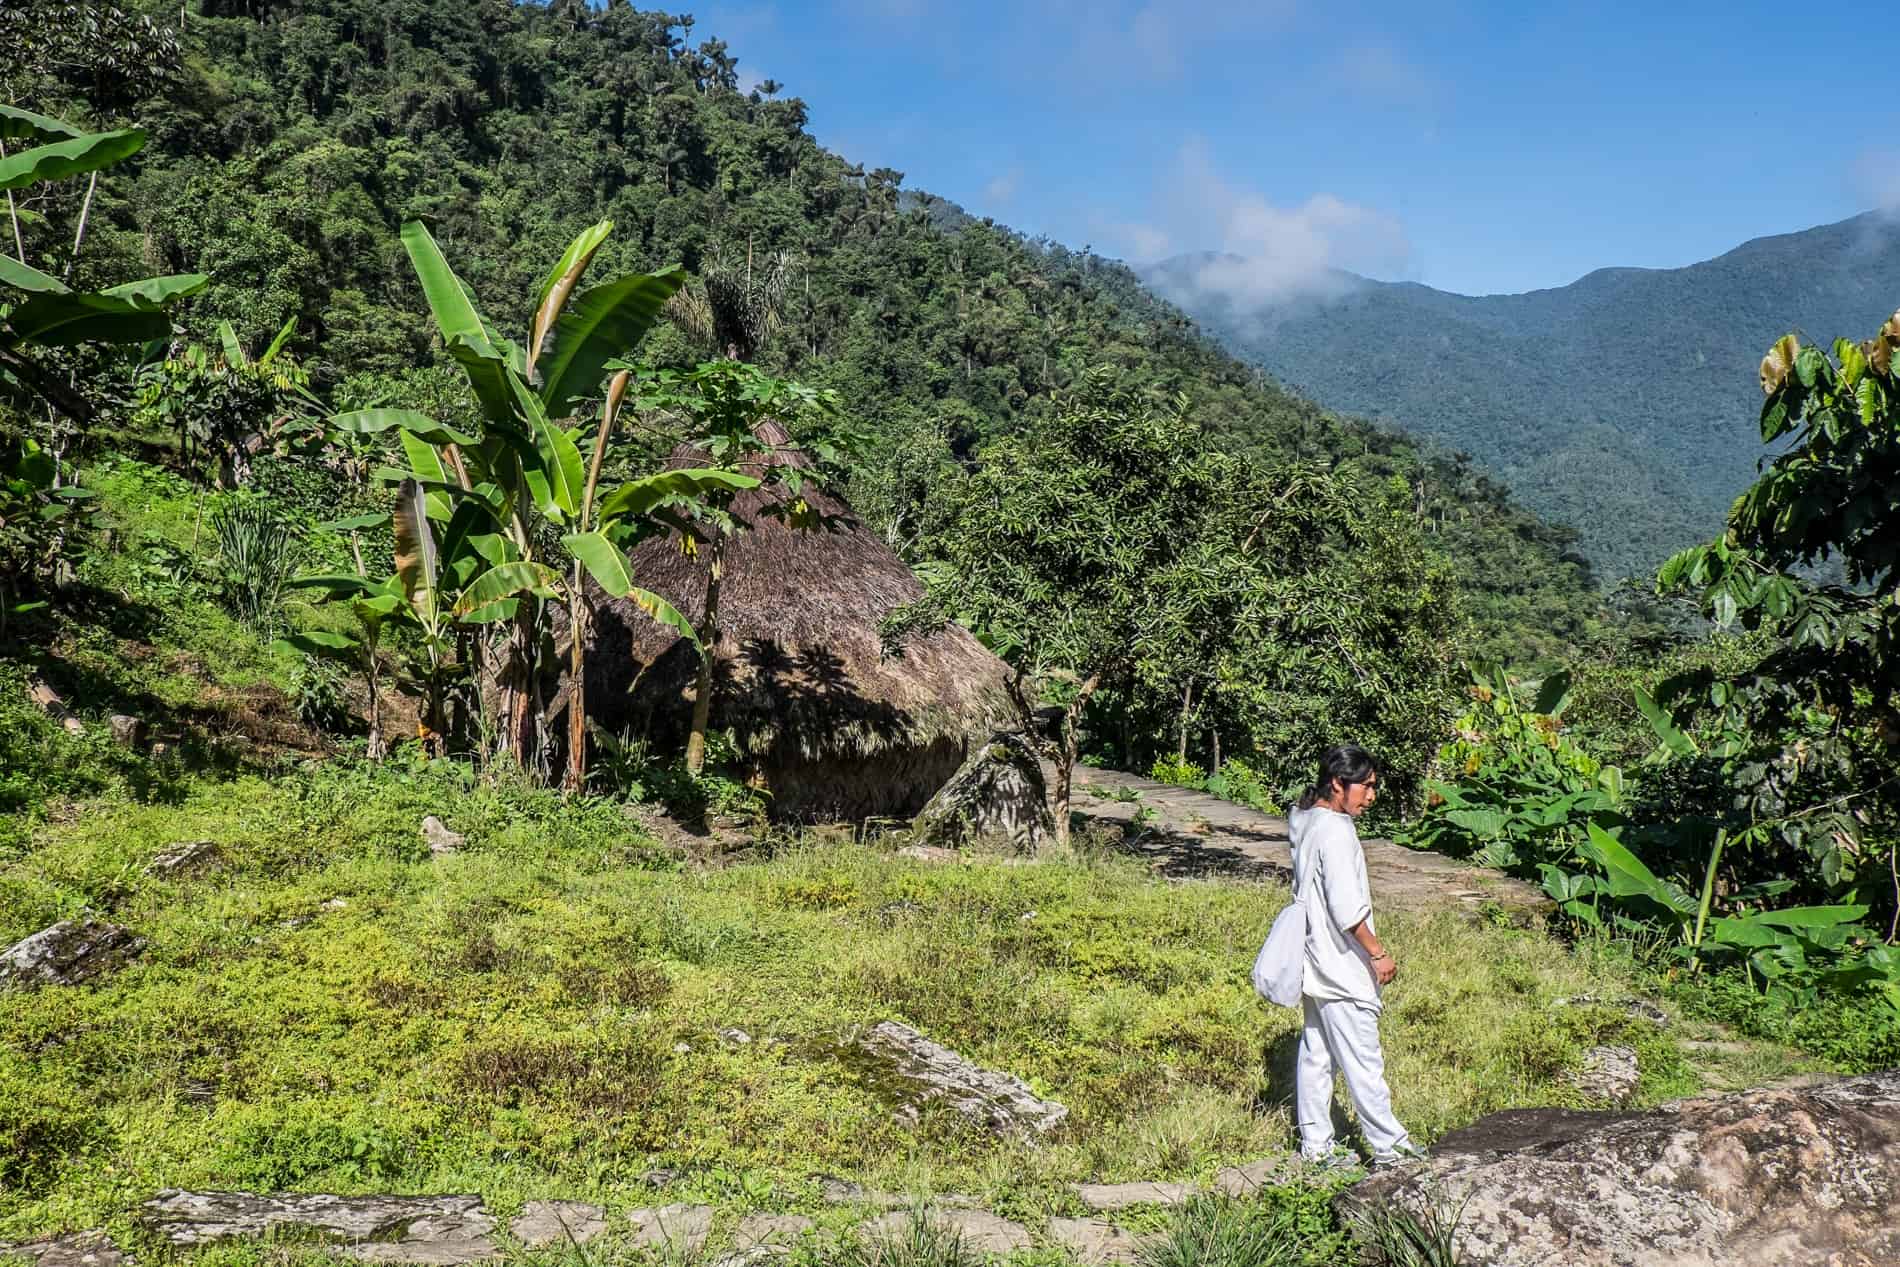 An indigenous Wiwa guide guiding a group on a Lost City tour in Colombia.